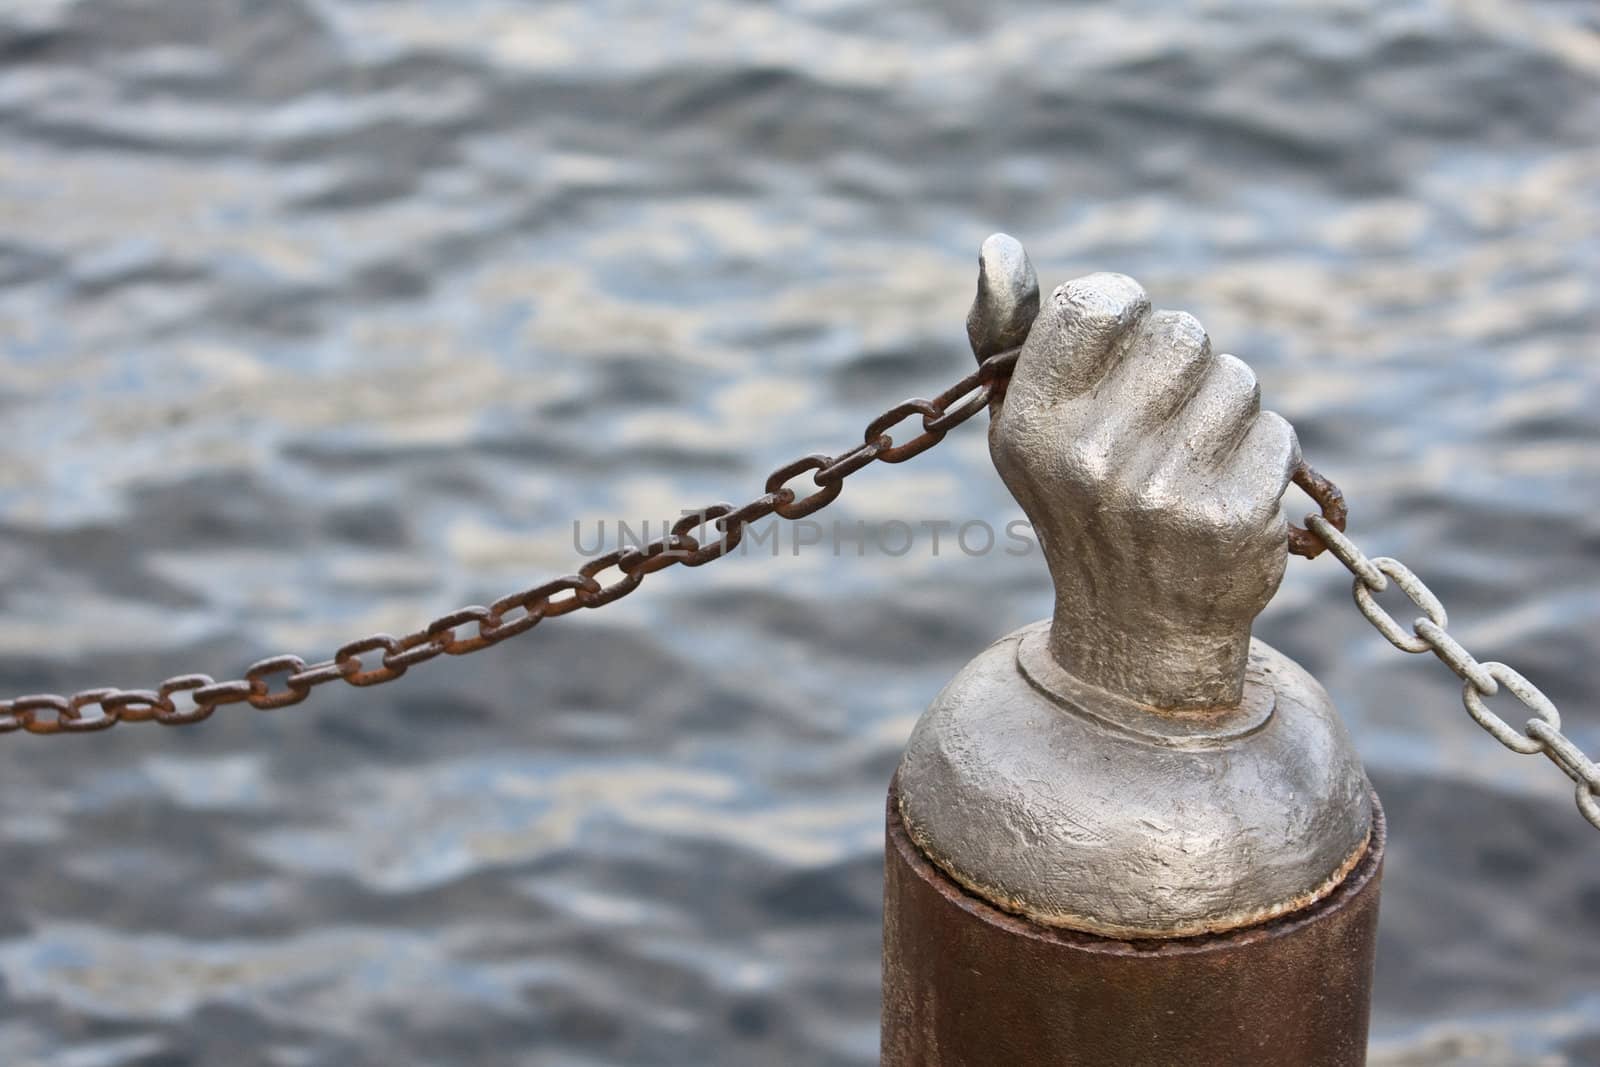 Steel Hand Holding Chain against the water by mwp1969